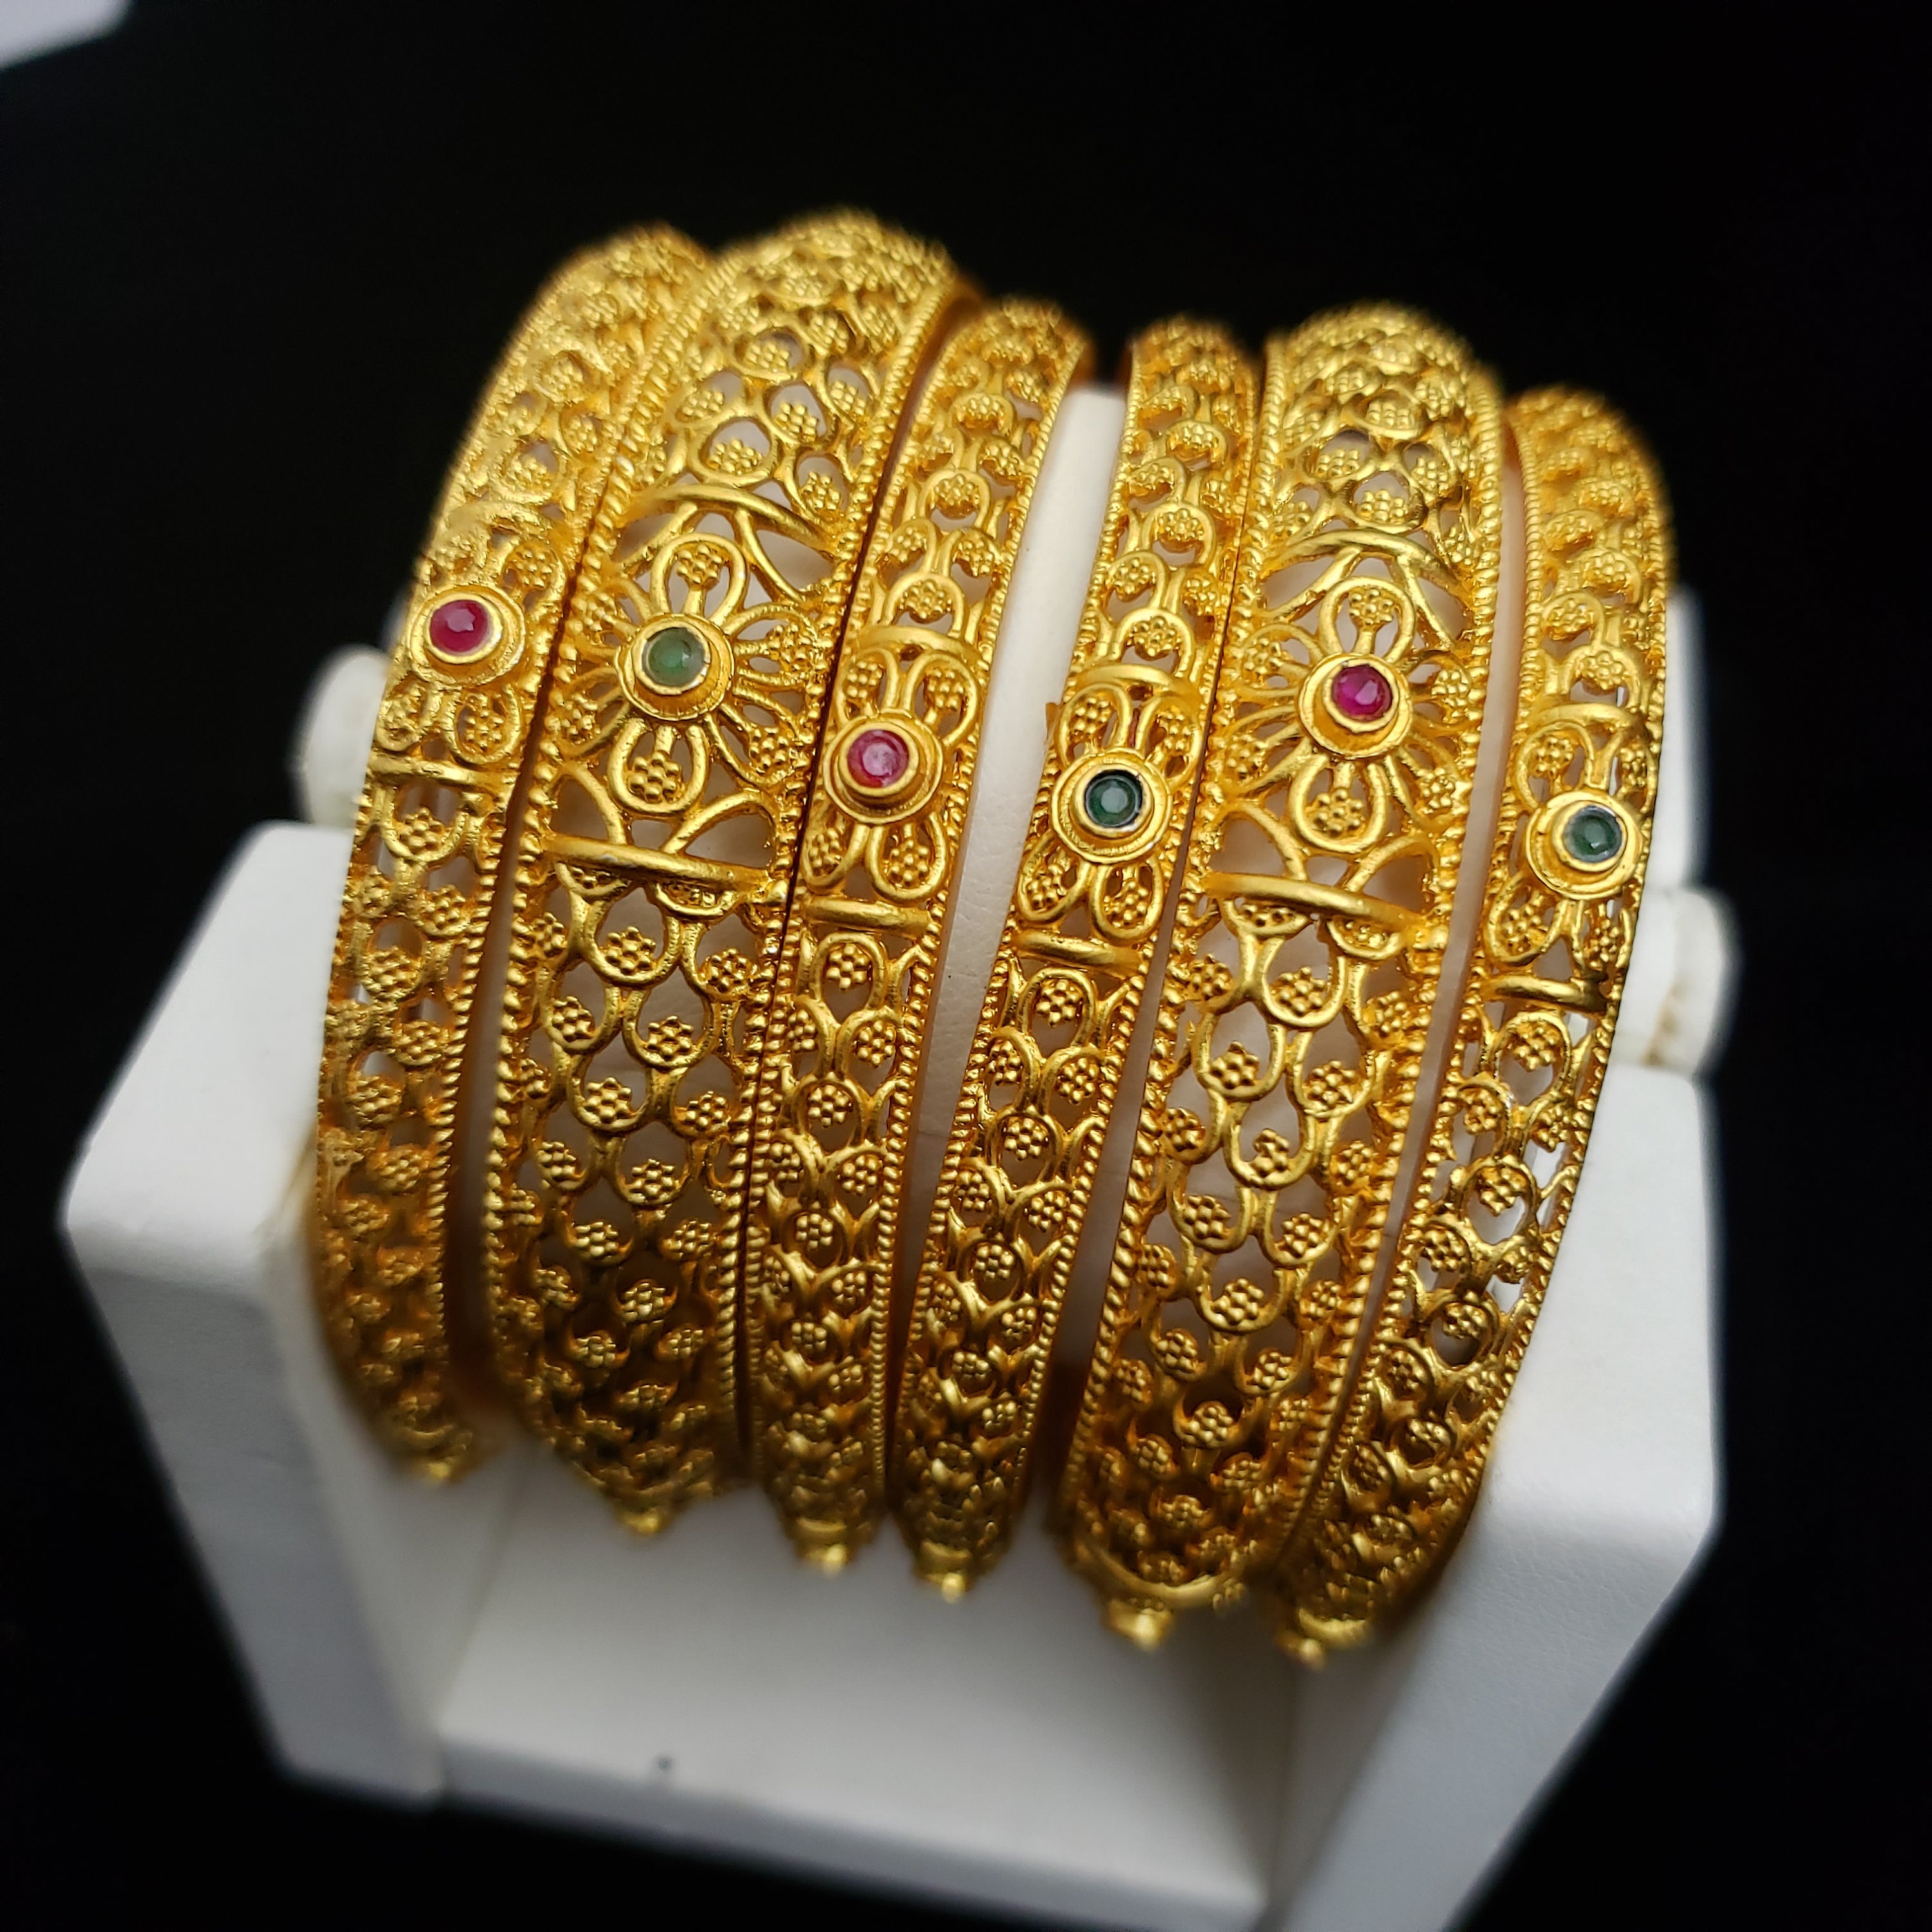 22ct gold plated bangles set SALE!